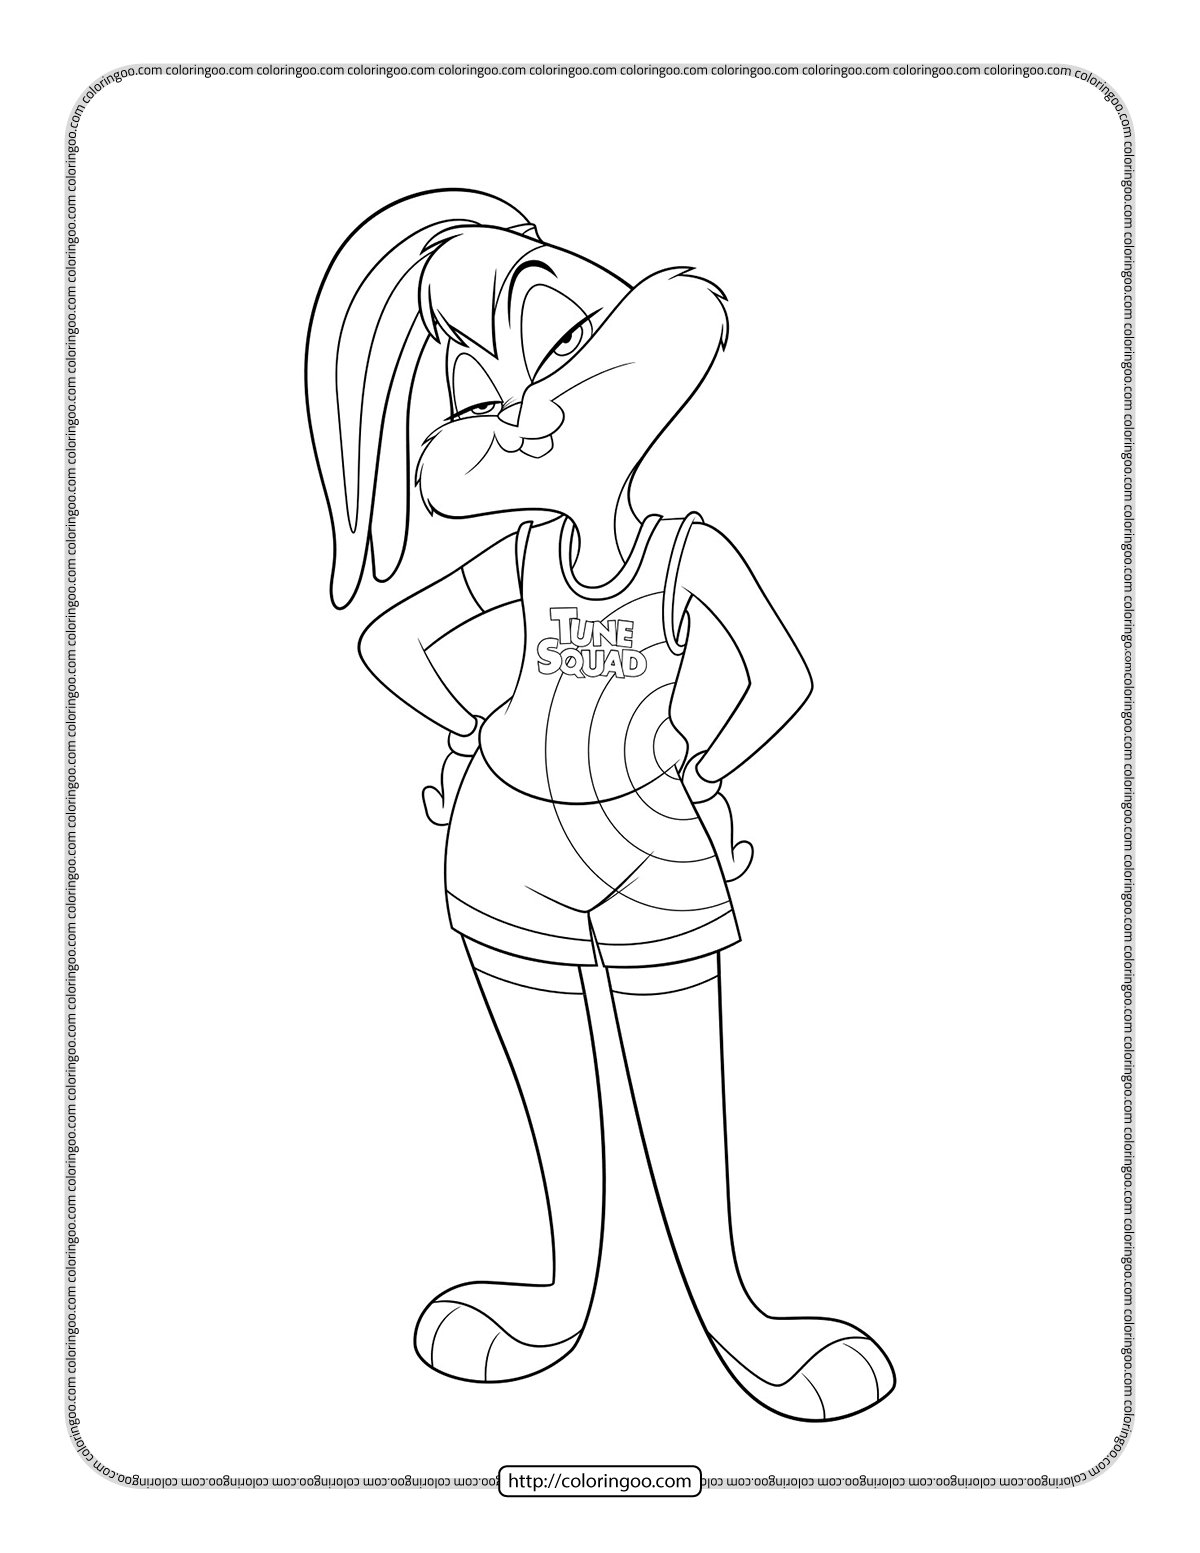 Printable space jam coloring pages updated